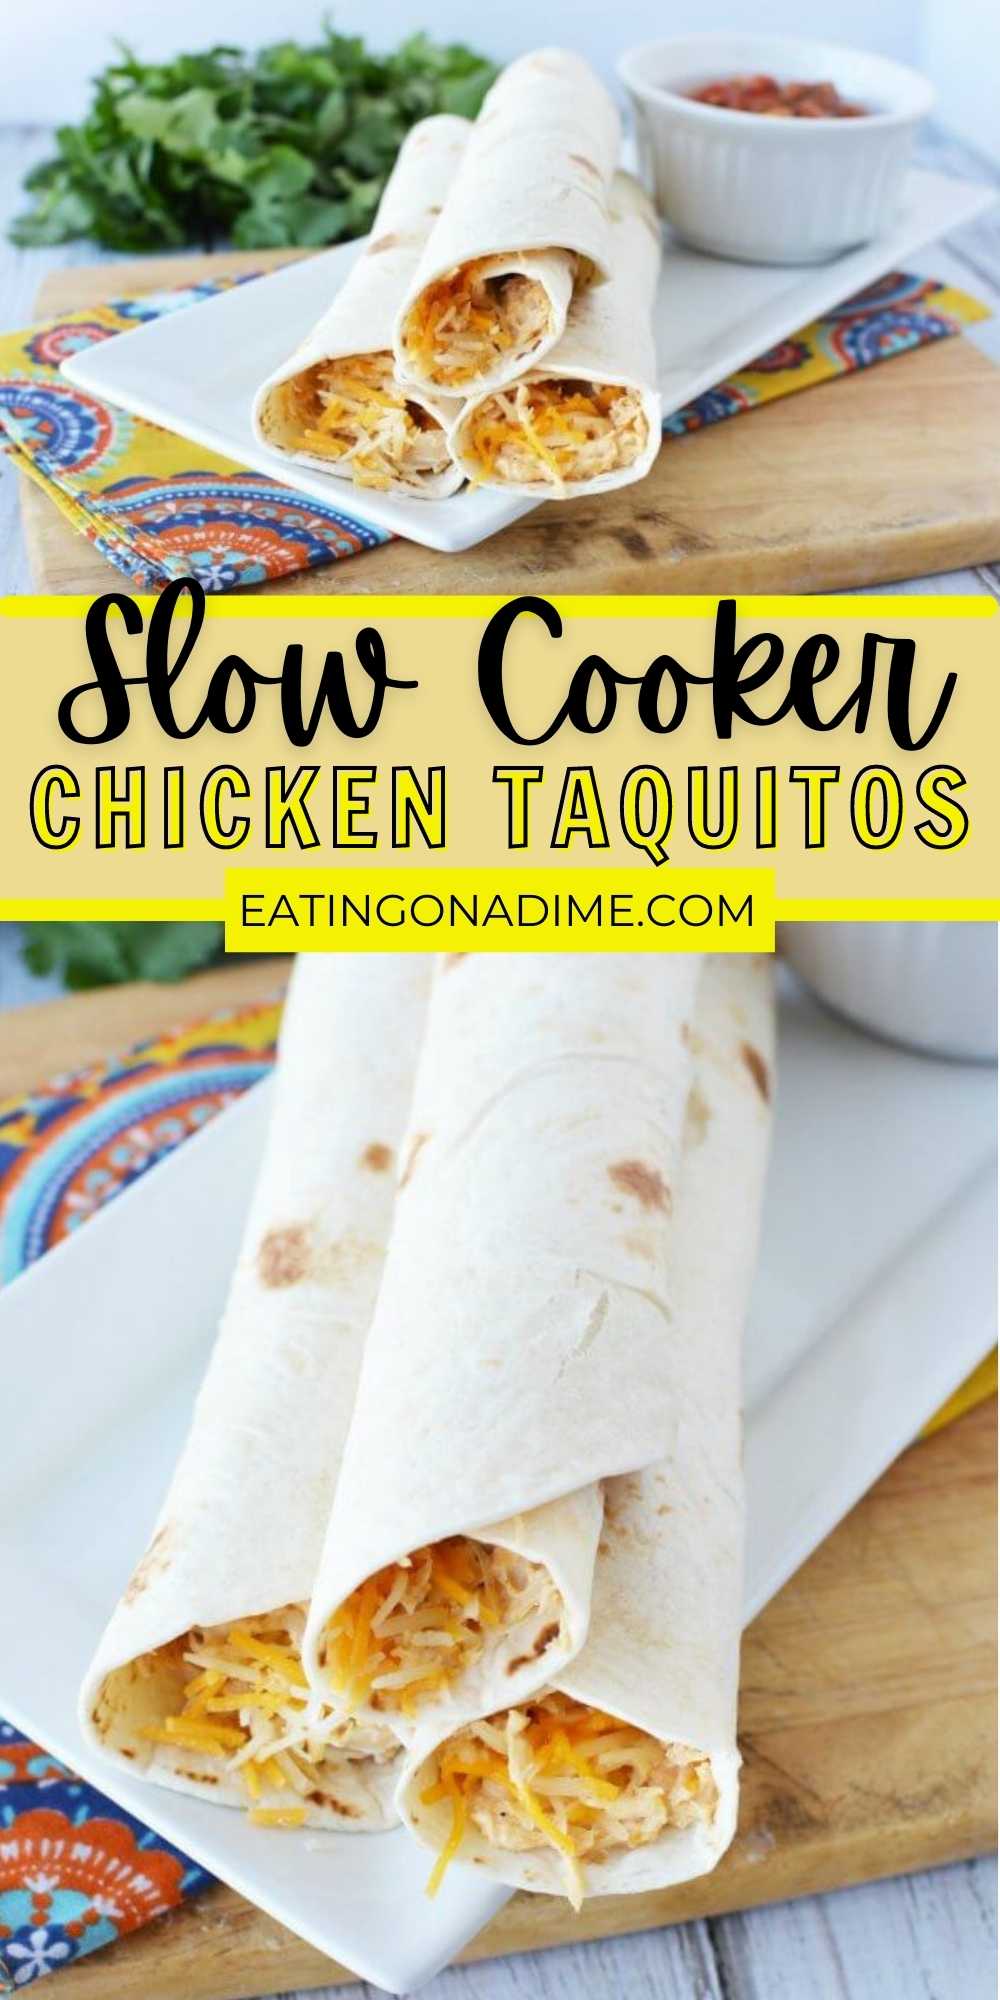 Try this easy homemade chicken taquitos recipe. Crockpot Chicken Taquitos will be a hit. Chicken and Cheese taquitos recipe is such an easy taquito recipe. You will love this easy slow cooker cheesy cream cheese chicken taquitos.  #eatingonadime #mexicanrecipes #chickenrecipes #taquitorecipes 
